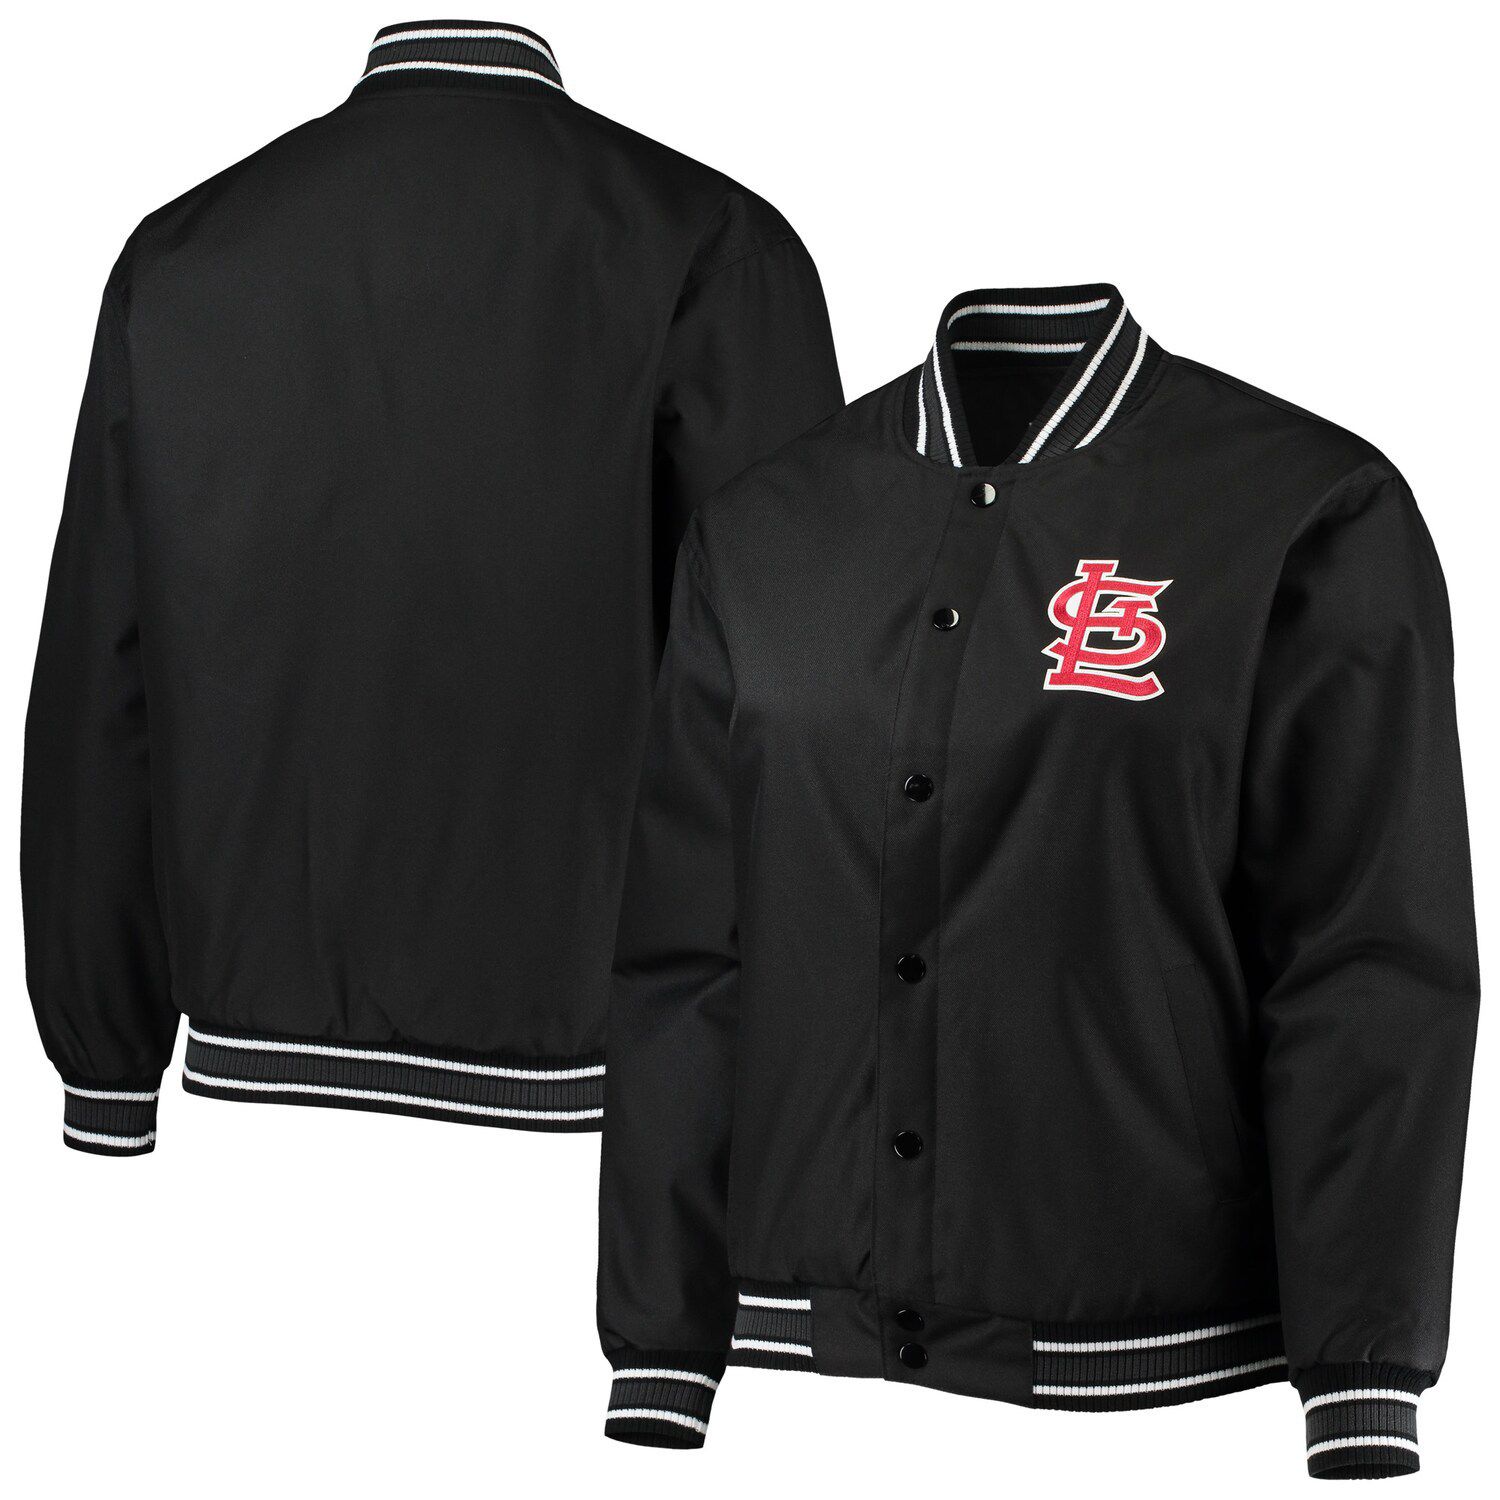 Image for Unbranded Women's JH Design Black St. Louis Cardinals Plus Size Poly Twill Full-Snap Jacket at Kohl's.